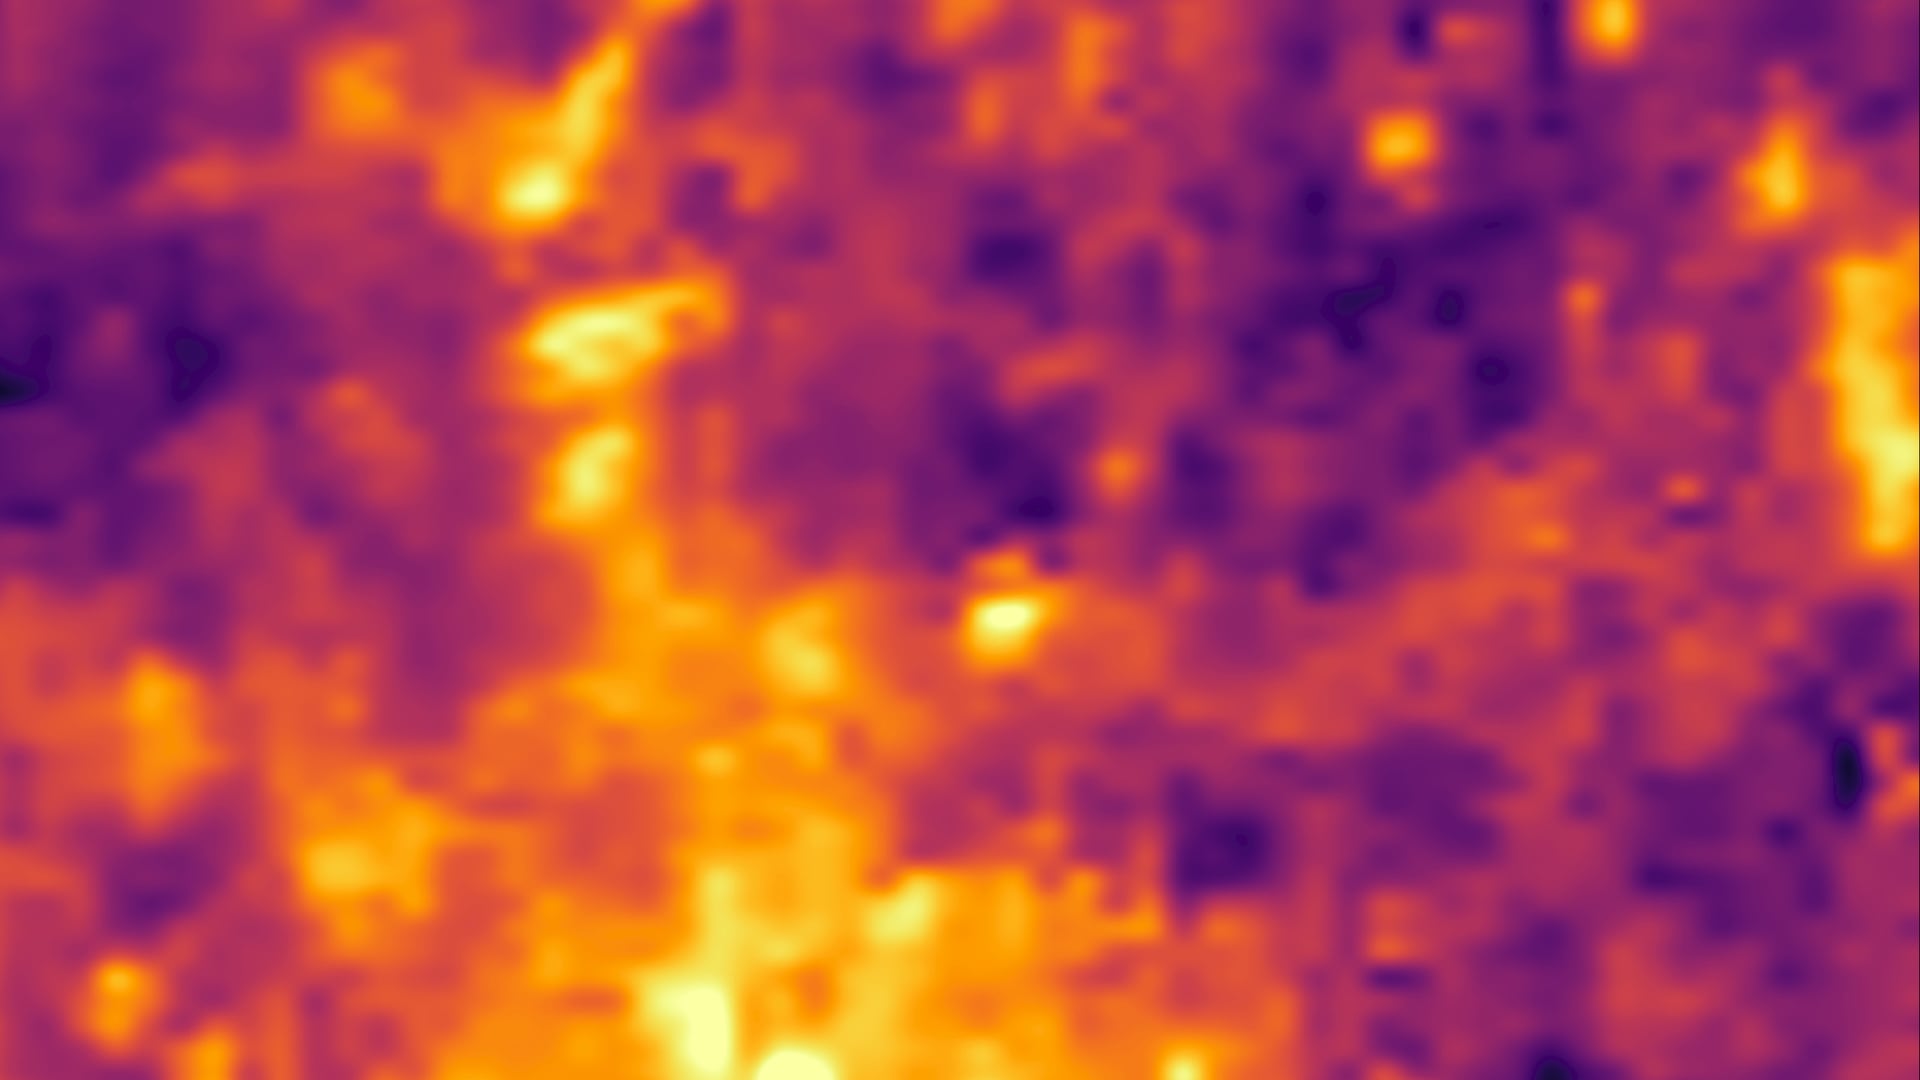 Nighttime Land Surface Temperature(LST) Anomaly image processed using Aqua-MODIS LST and Emissivity data. The image displays temperature differences from mean nighttime temperature for Eastern Massachusetts for June, July and August of 2019 combined. Brighter shades of yellow represent positive temperature anomalies, or 'hot spots,’ and darker shades of purple represent negative temperature anomalies or 'cool spots.’ These products will help city planners understand how heat varies across the landscape.   Keywords: urban heat island, nighttime land surface temperature, climate preparedness, remote sensing, Cambridge, Massachusetts​